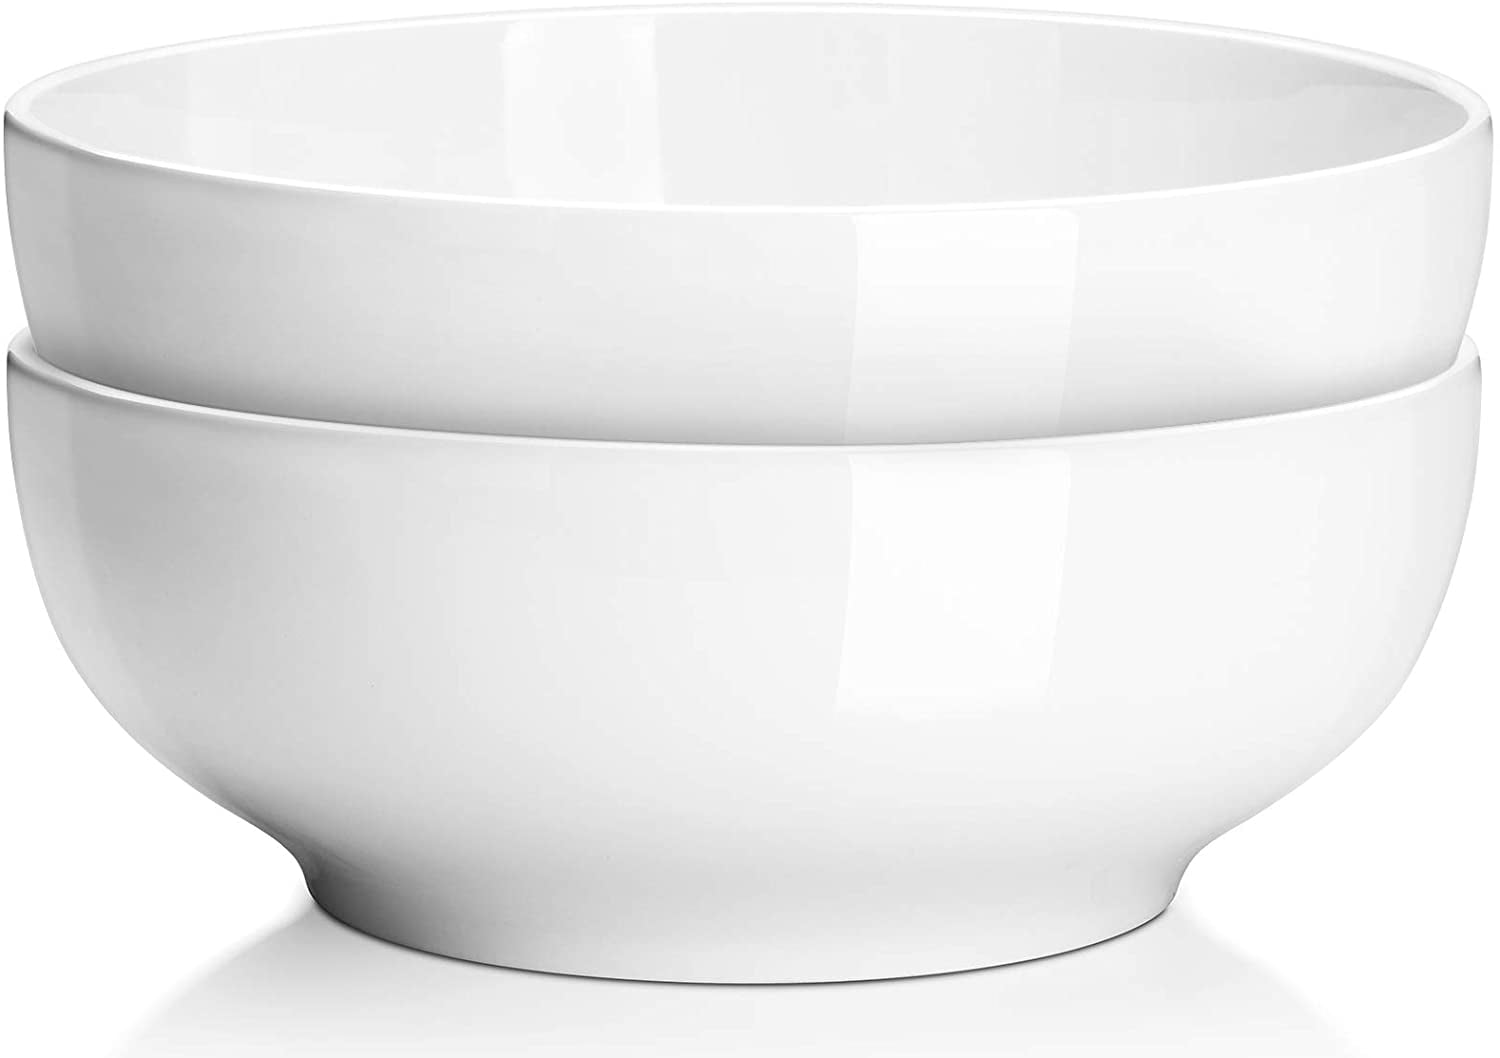 Soup and Fruit Anti Slip and Stackable DOWAN 10 Serving Plate Bowls Set of 2 Large Porcelain Serving Dishes for Dinner White Serving Bowls and Platters for Salad Pasta 1900ml 